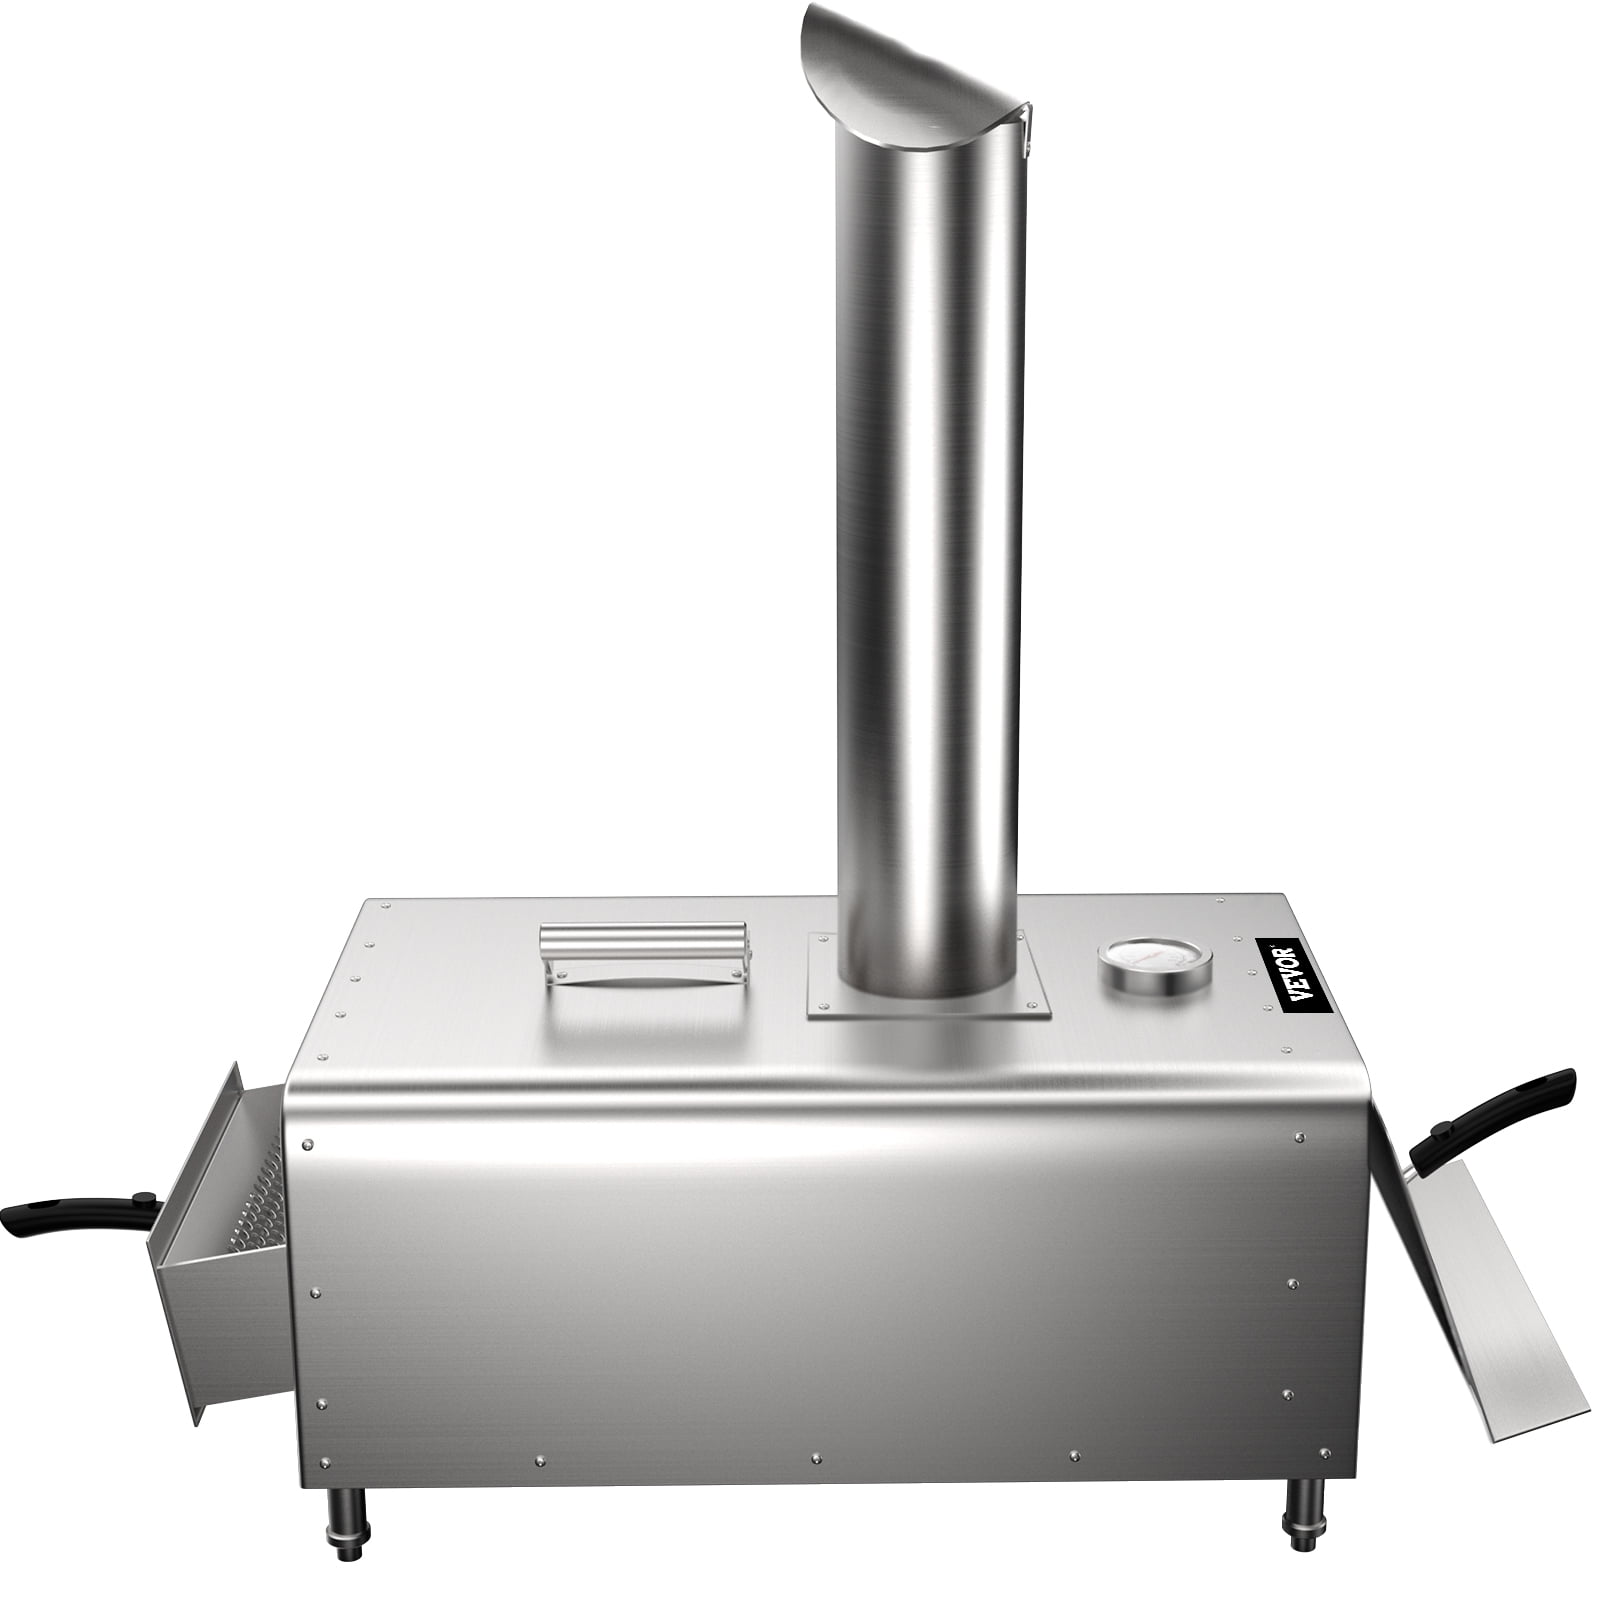 VEVOR PSLHWBXSWJLK8A3I3V0 Pizza Oven 12 in. Stainless Steel Portable Charcoal Fired Pizza Maker 932°F Max Temperature Outdoor Pizza Oven, Silver